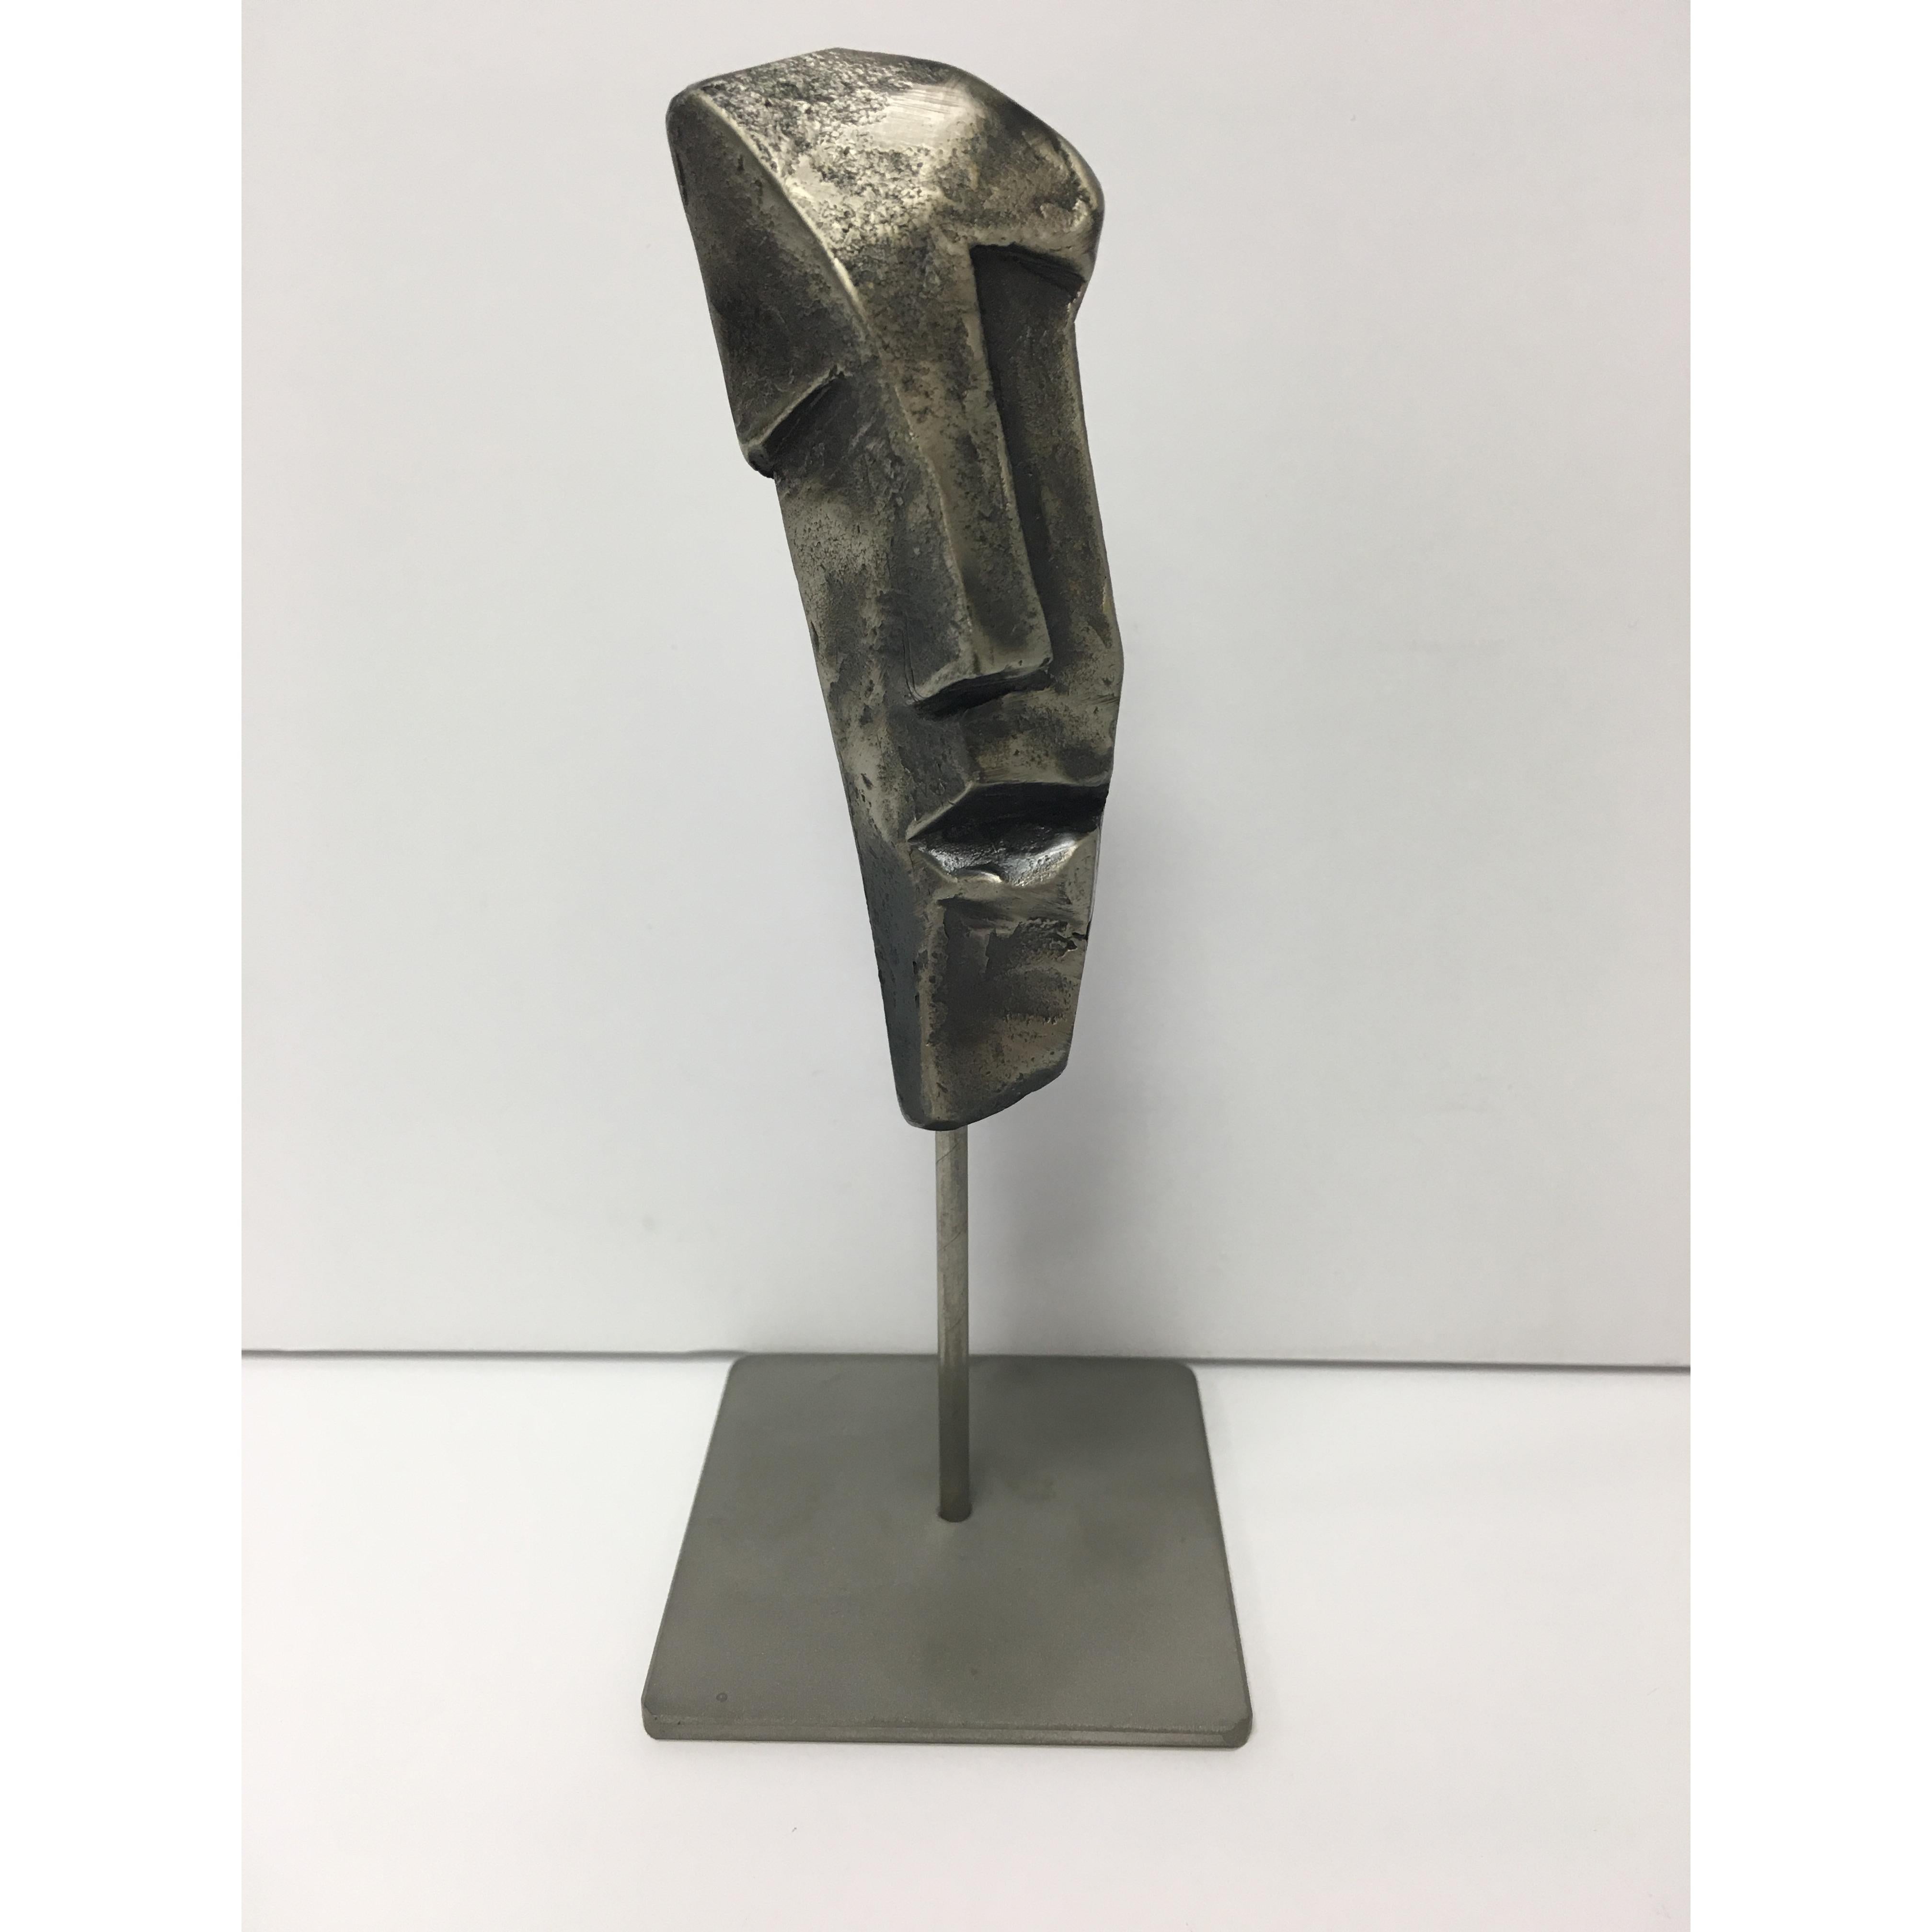 Gail Folwell Figurative Sculpture - Open Minds with Steel Base (Klimt)